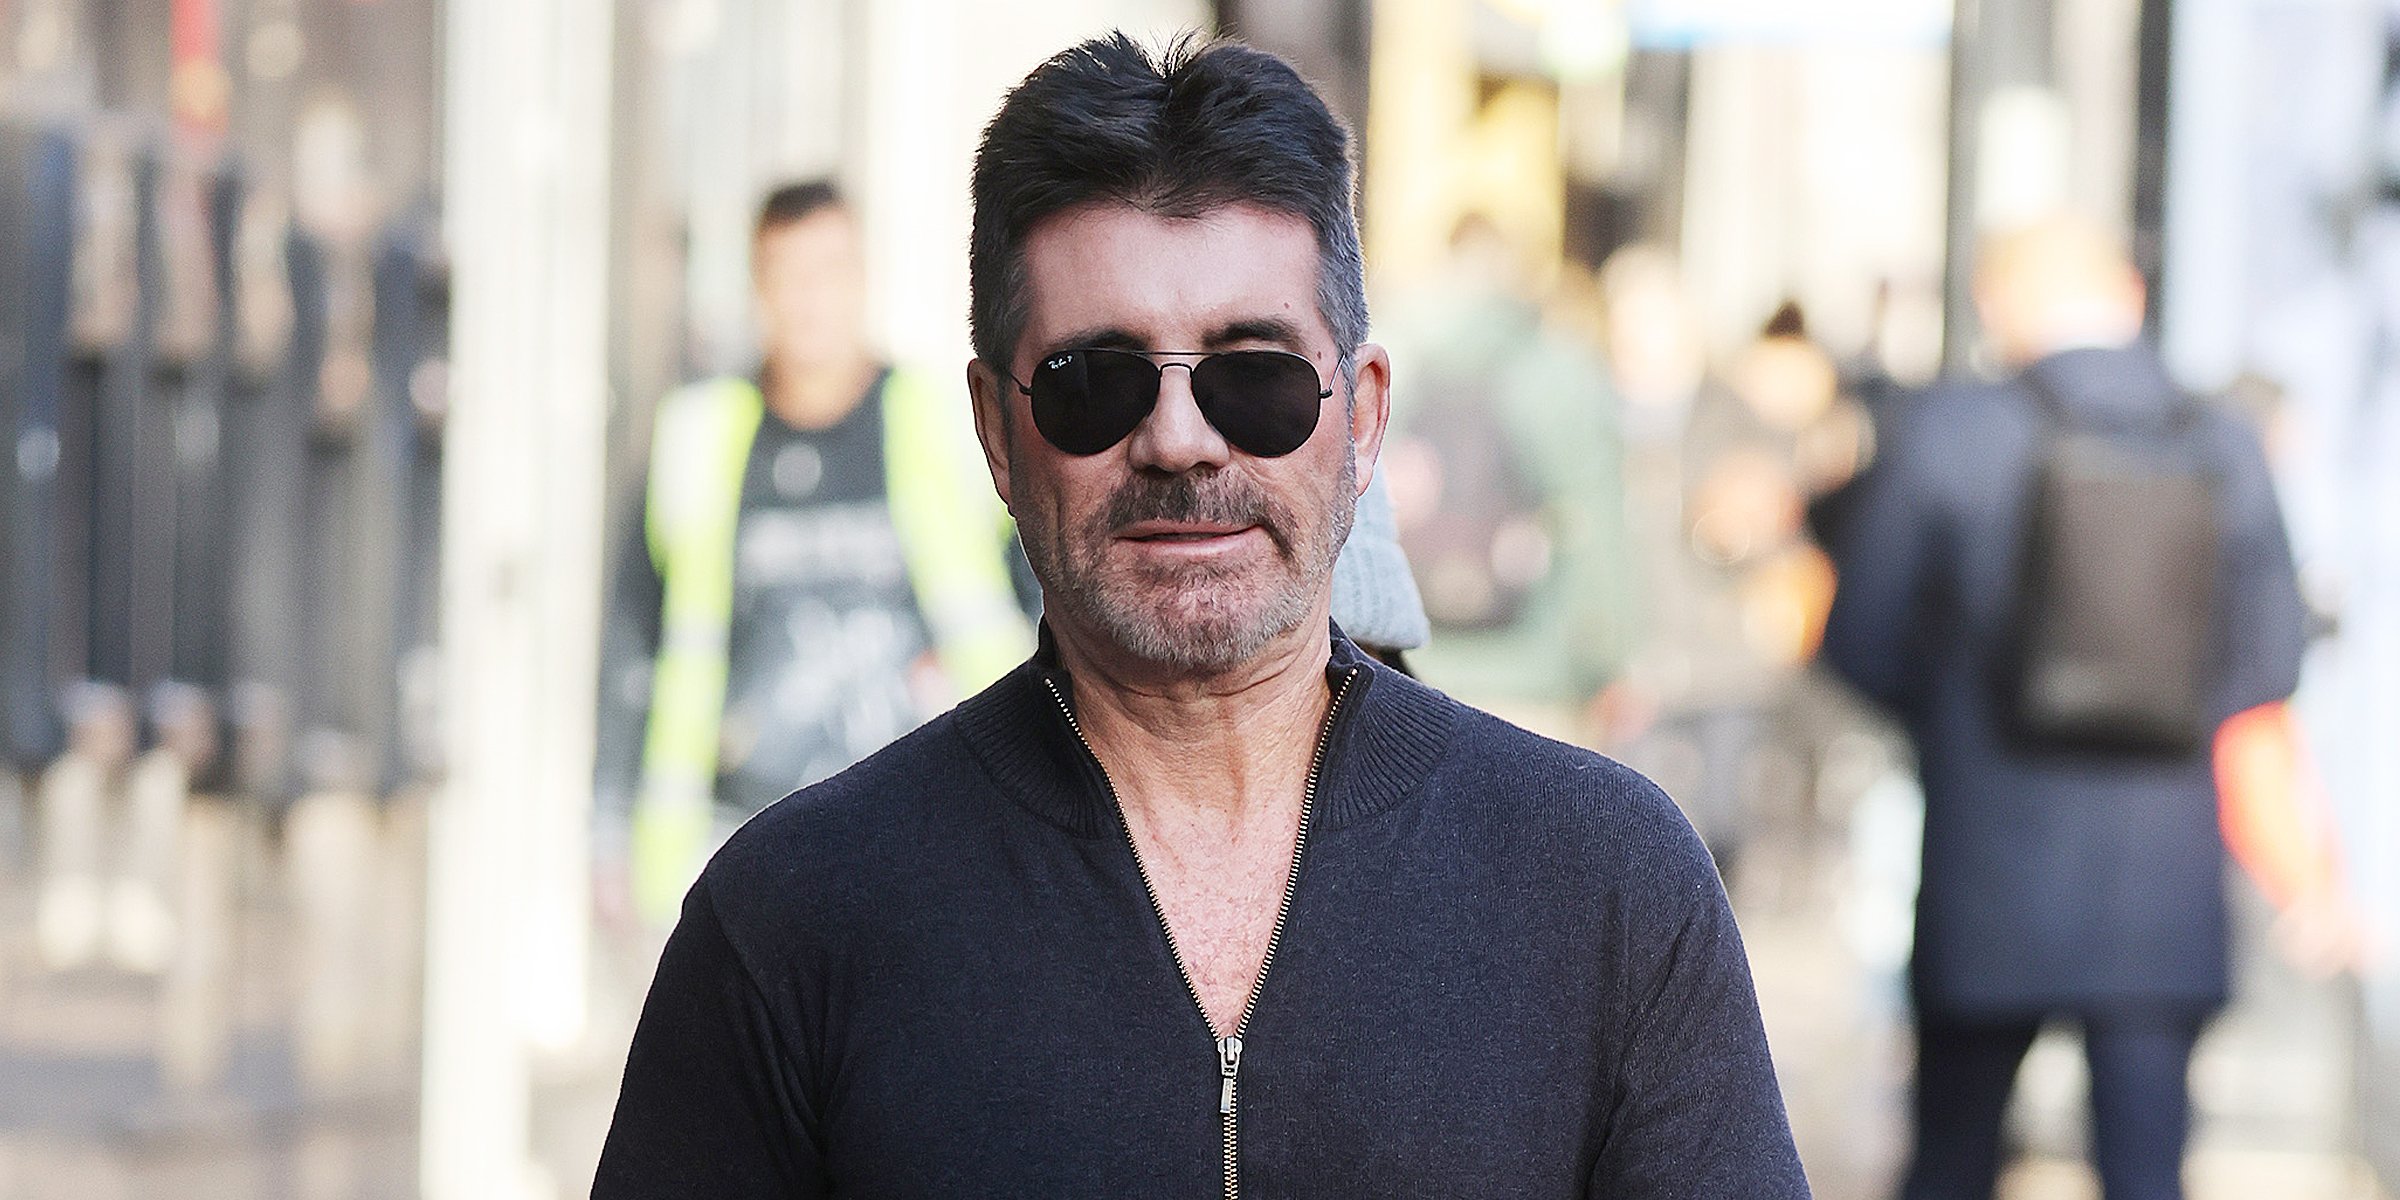 Simon Cowell | Source: Getty Images